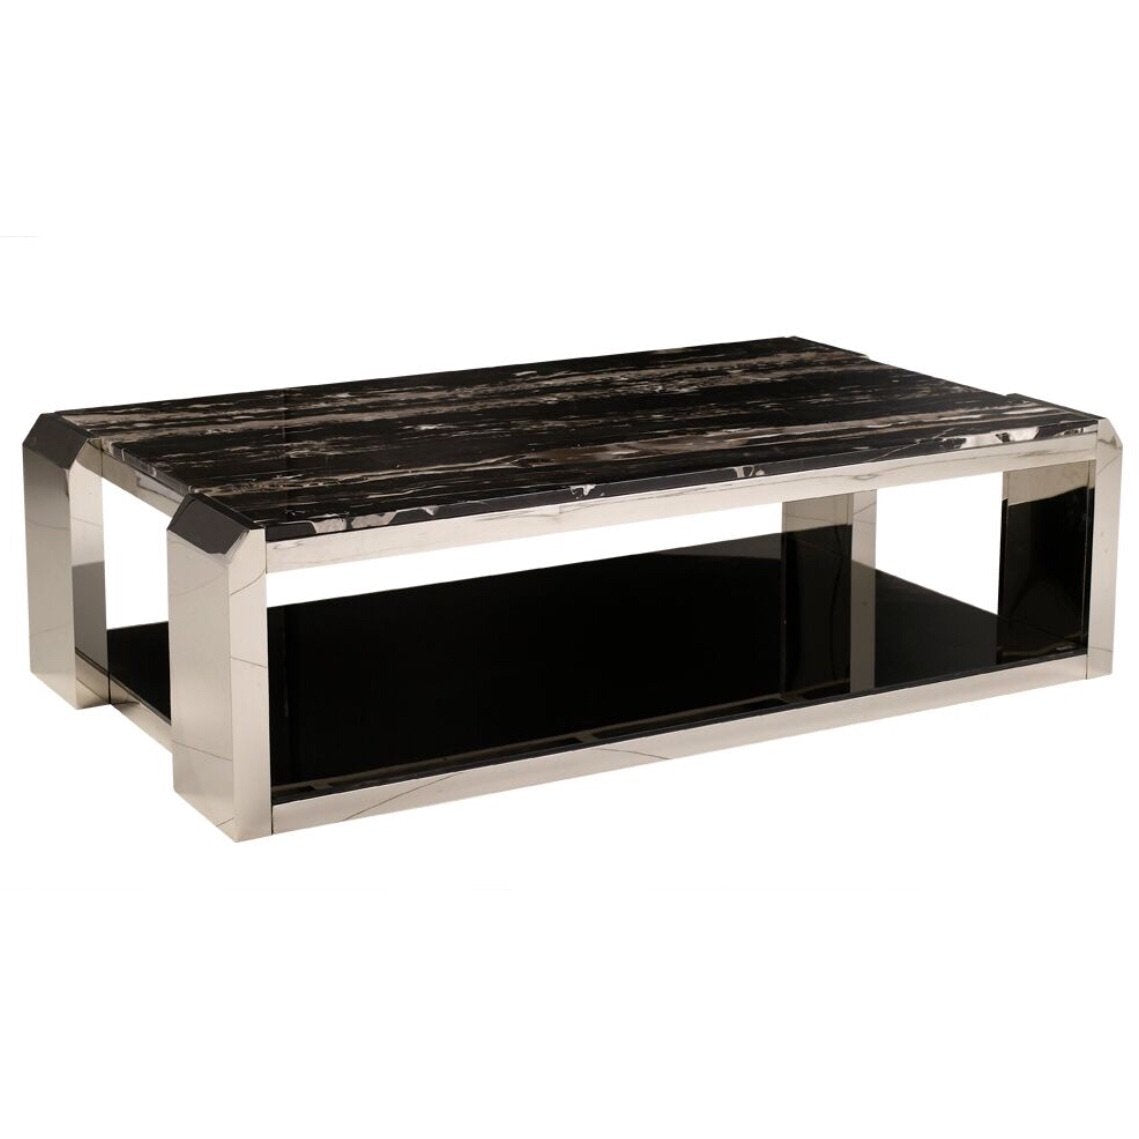 CHARLA  Marble Top Coffee Table